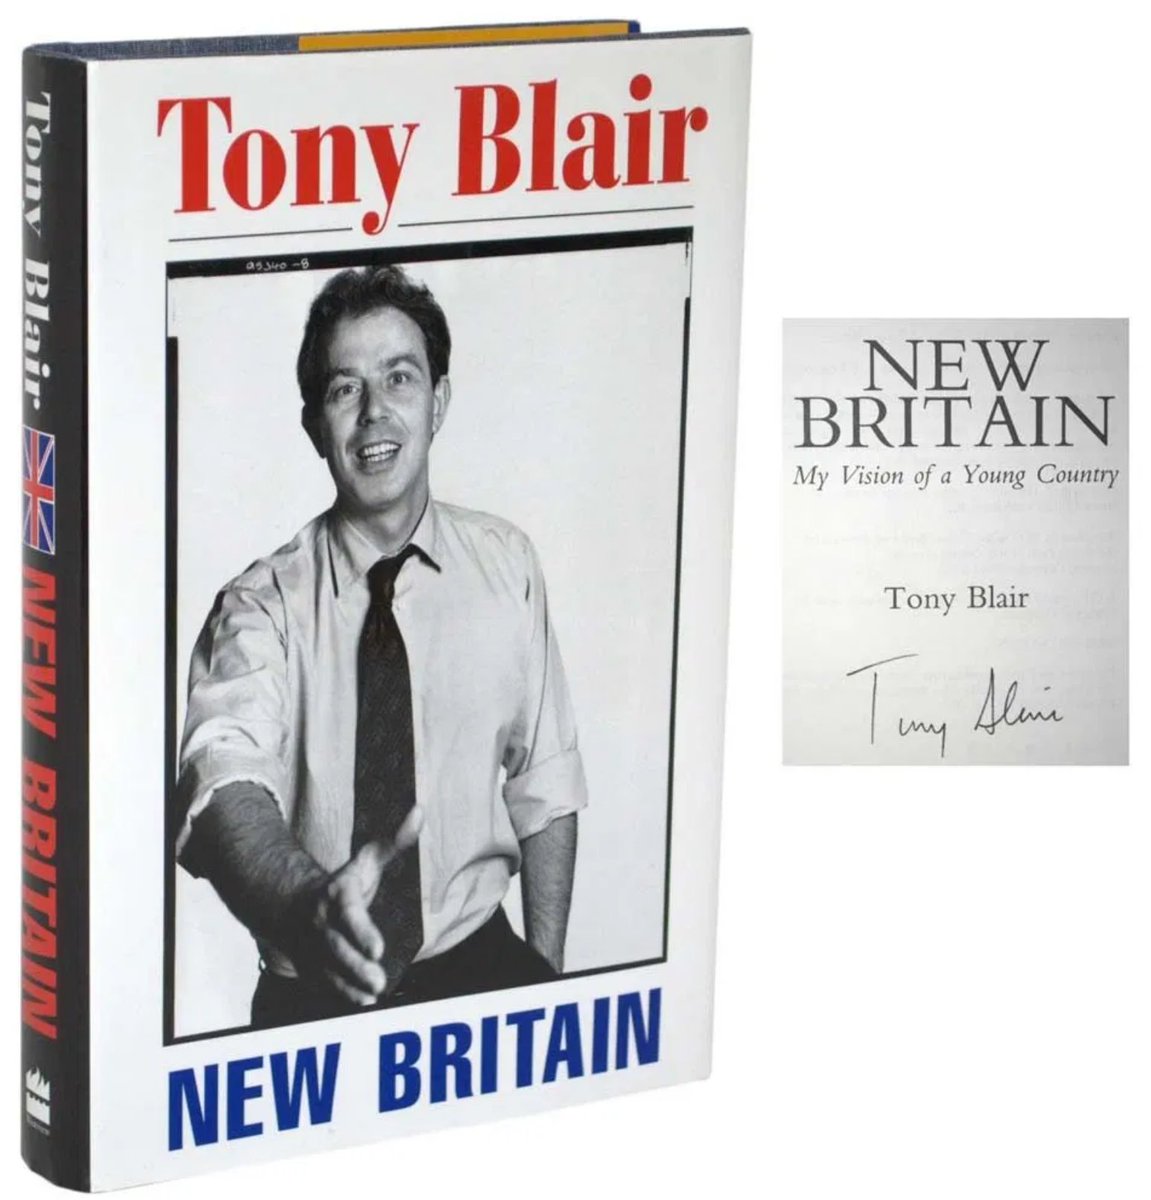 Blair’s solution was to turn the UK into what he called ‘a new nation-state’: “A new Britain for a new world. Britain as one nation. Britain as a young country again.” 3/x